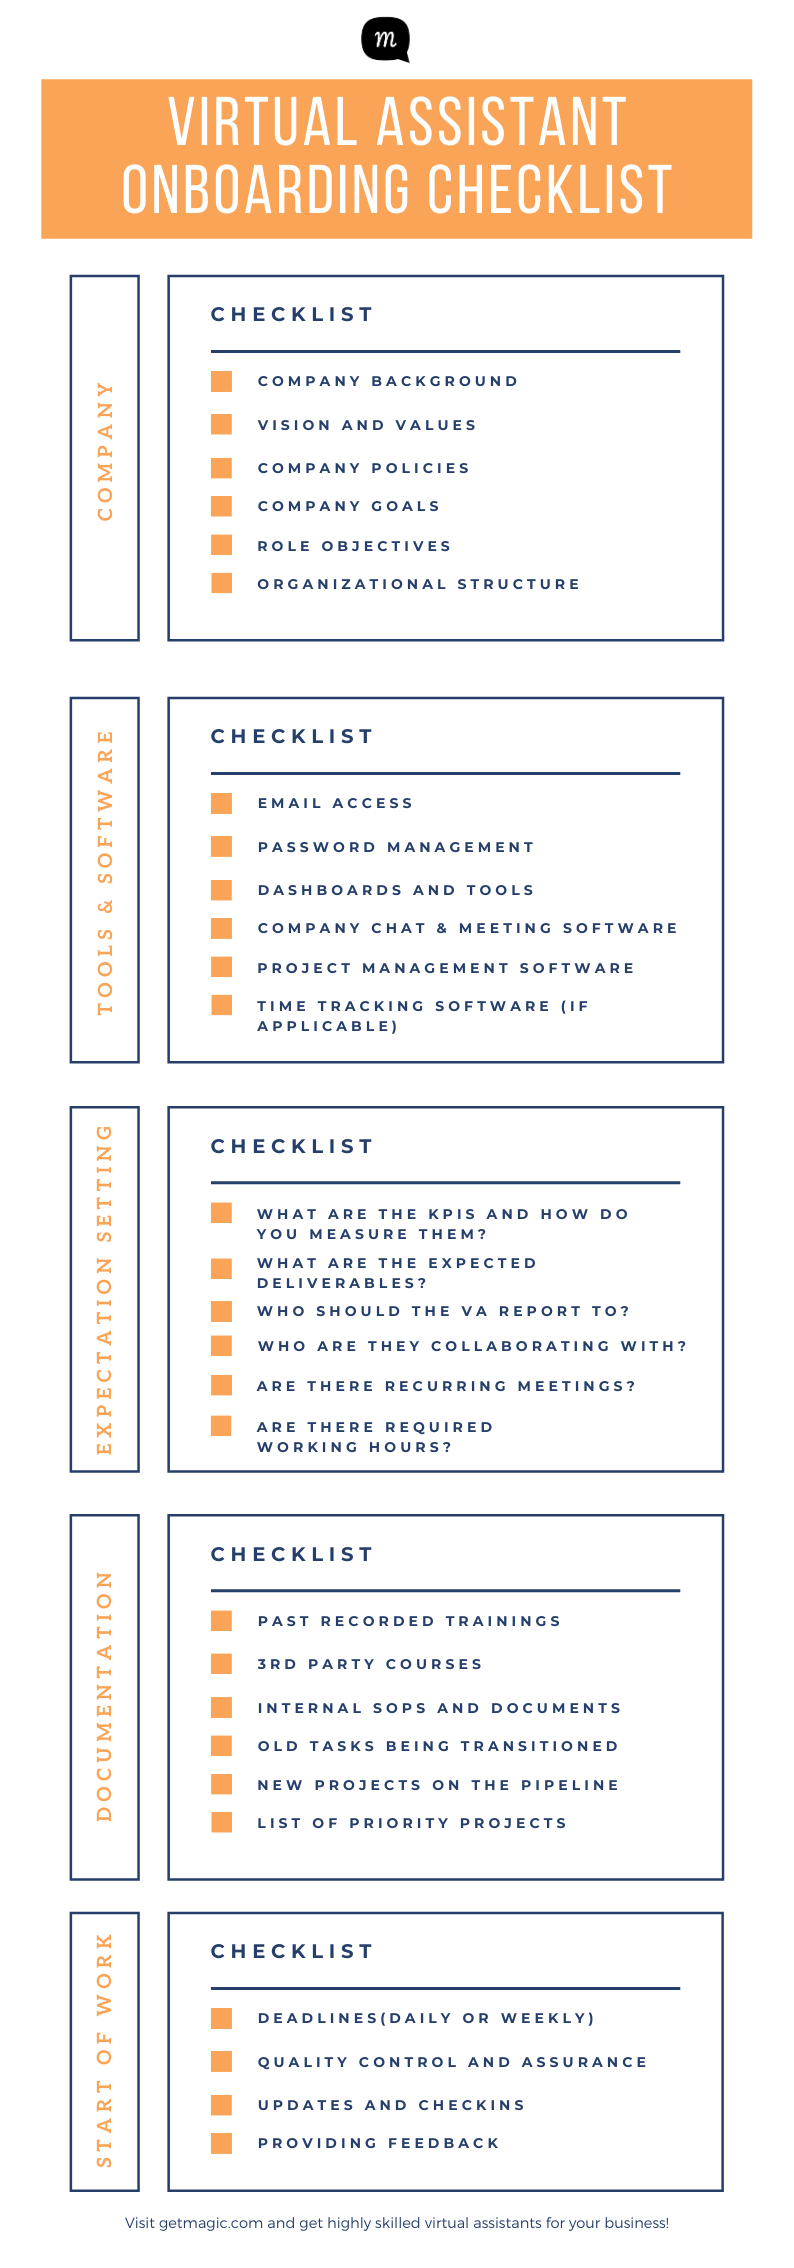 Infographic on Virtual Assistant Onboarding Process Checklist